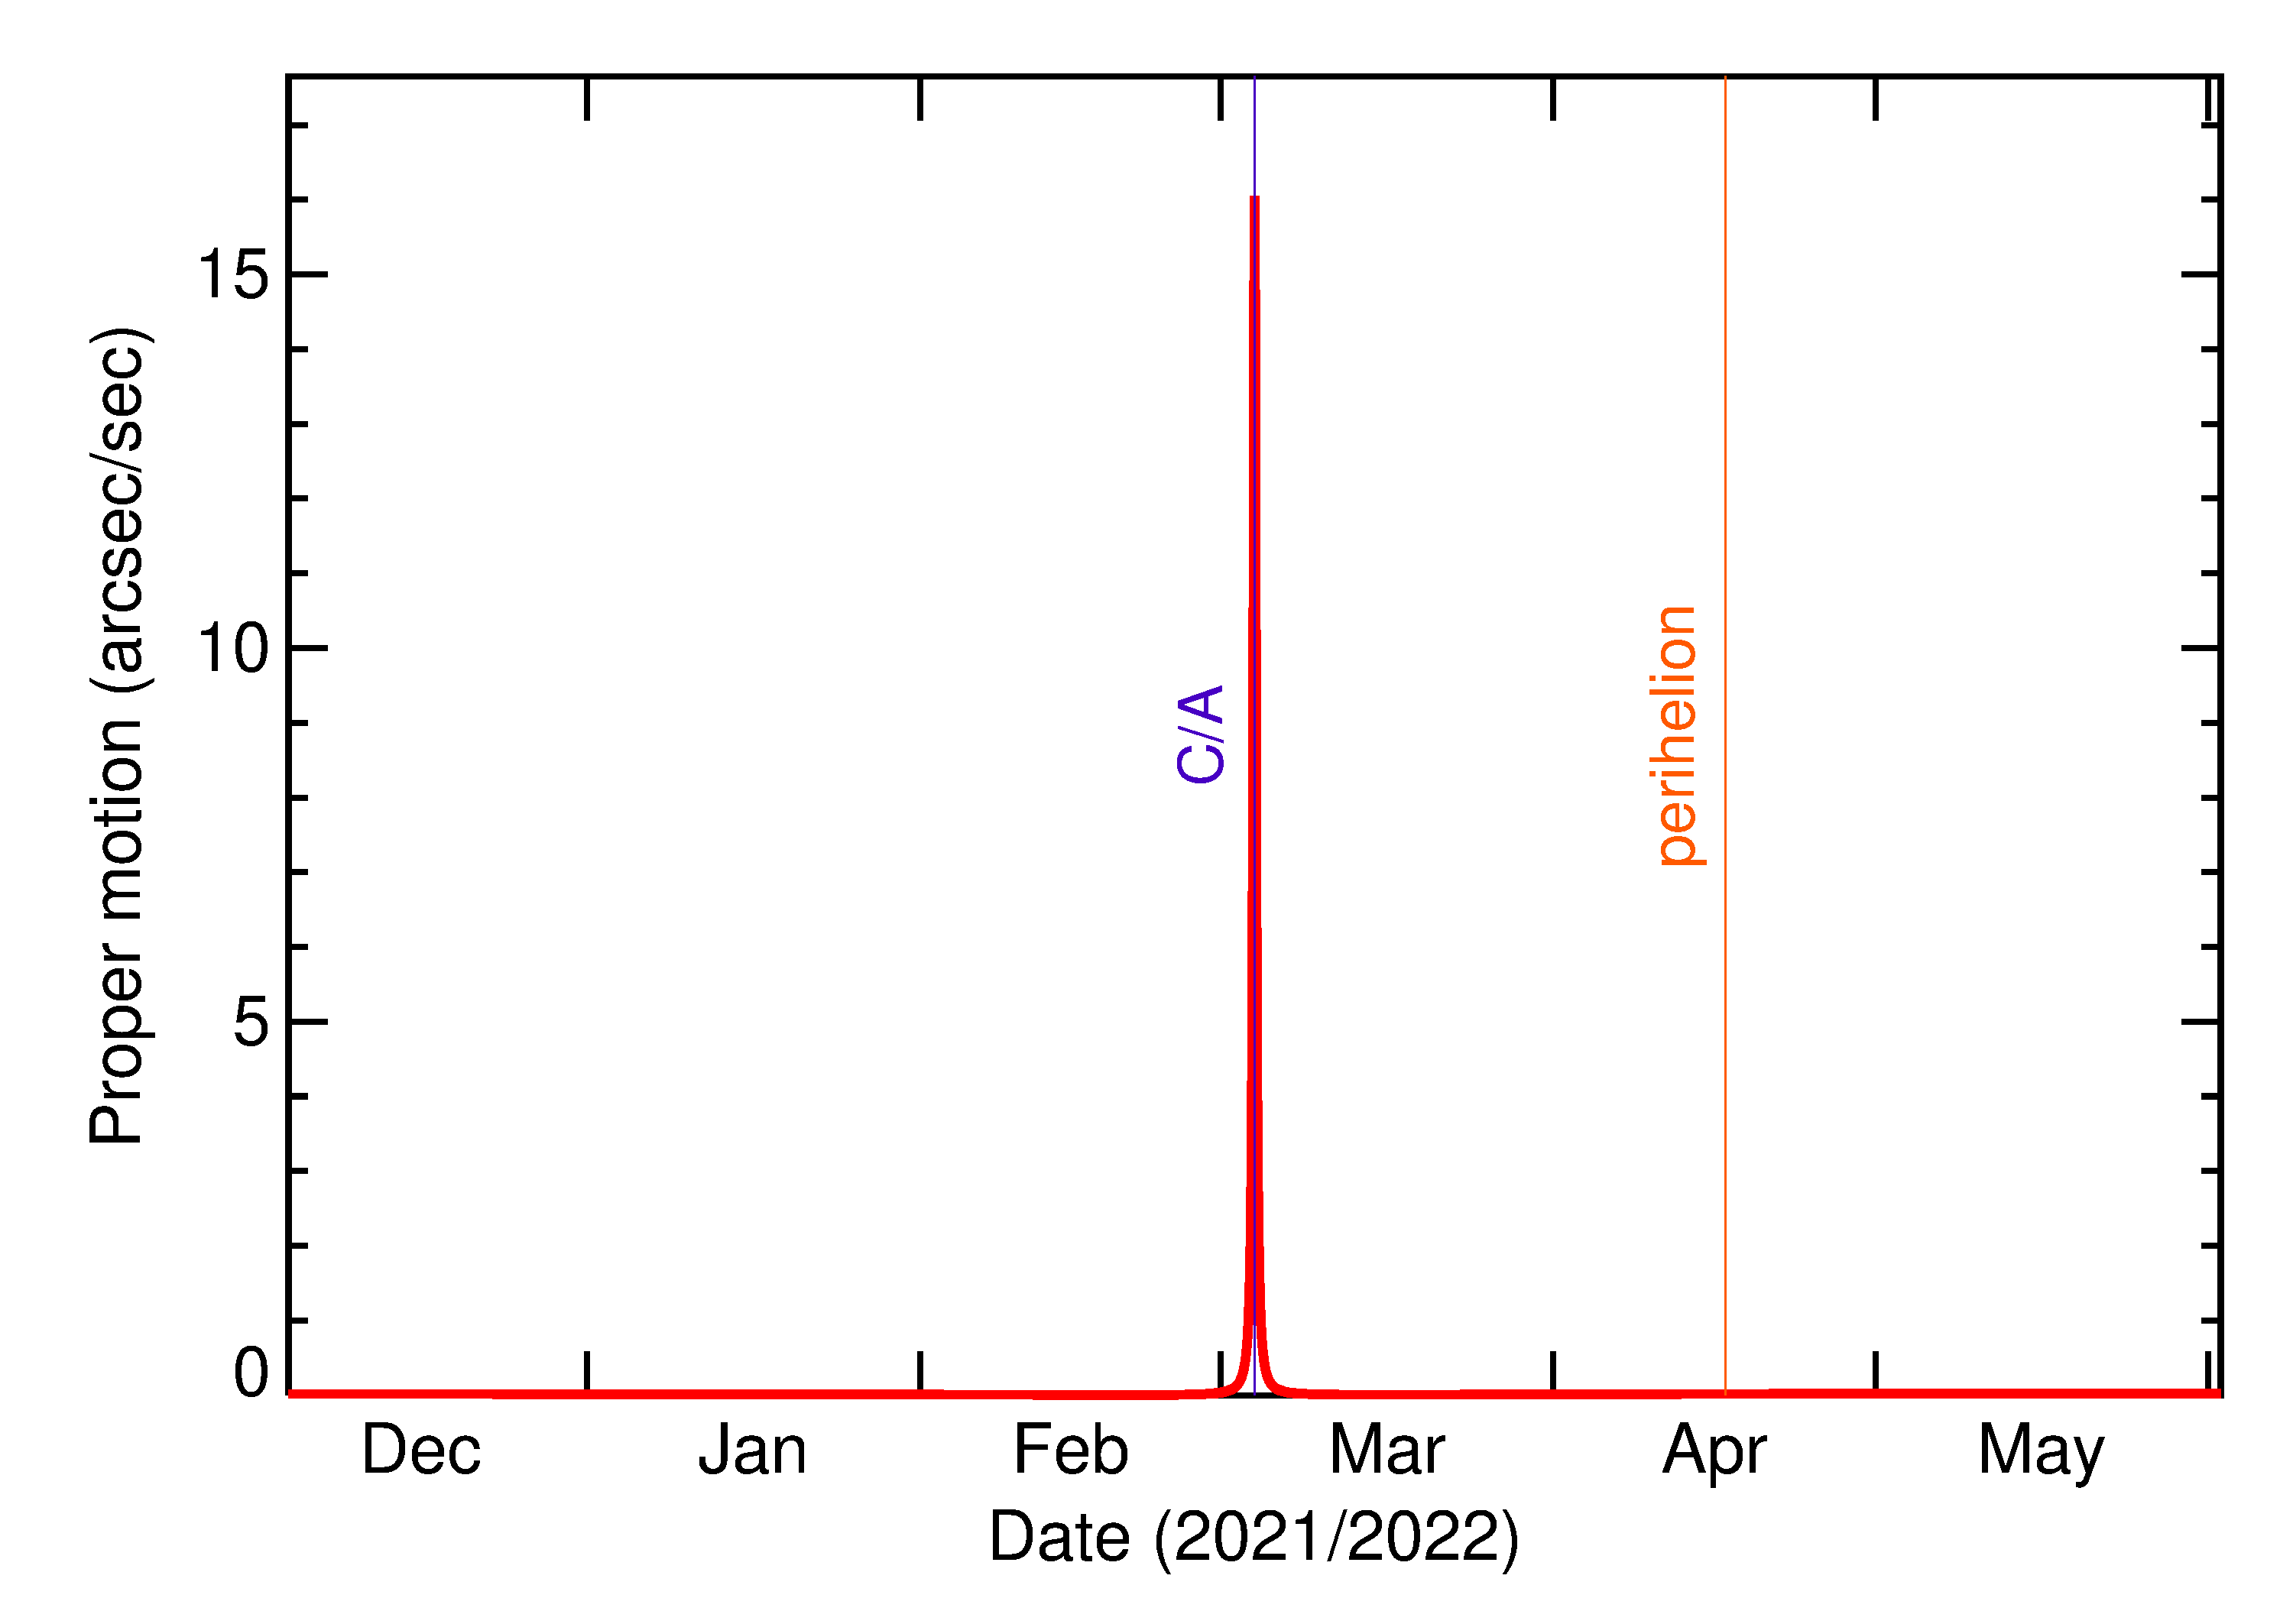 Proper motion rate of 2022 EQ in the months around closest approach